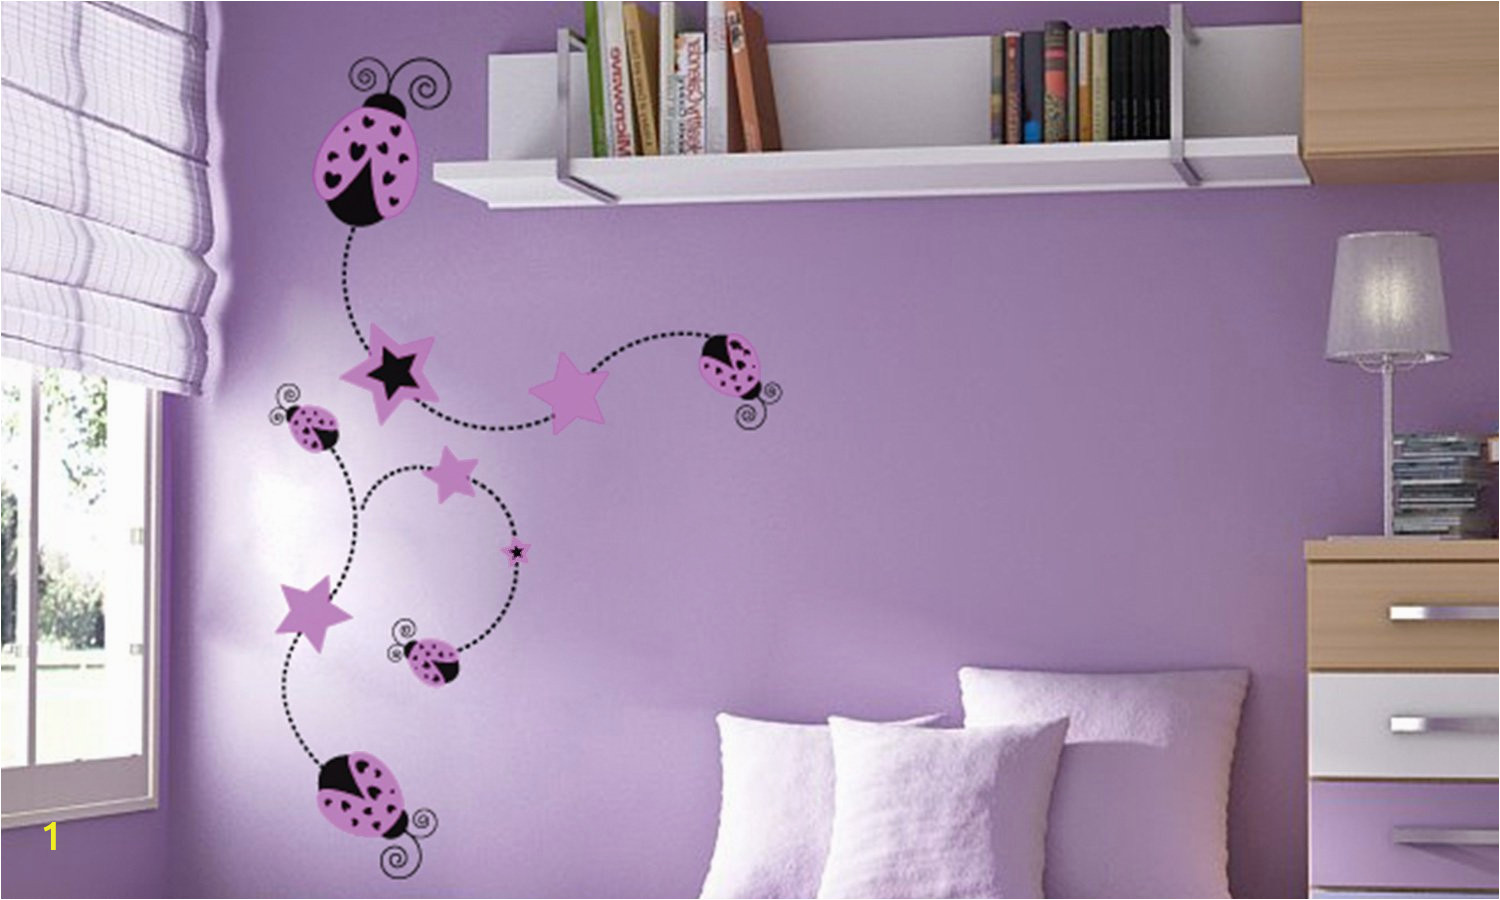 Peter Rabbit Wall Mural Stickers Buy Modern Lady Bug Wall Stickers